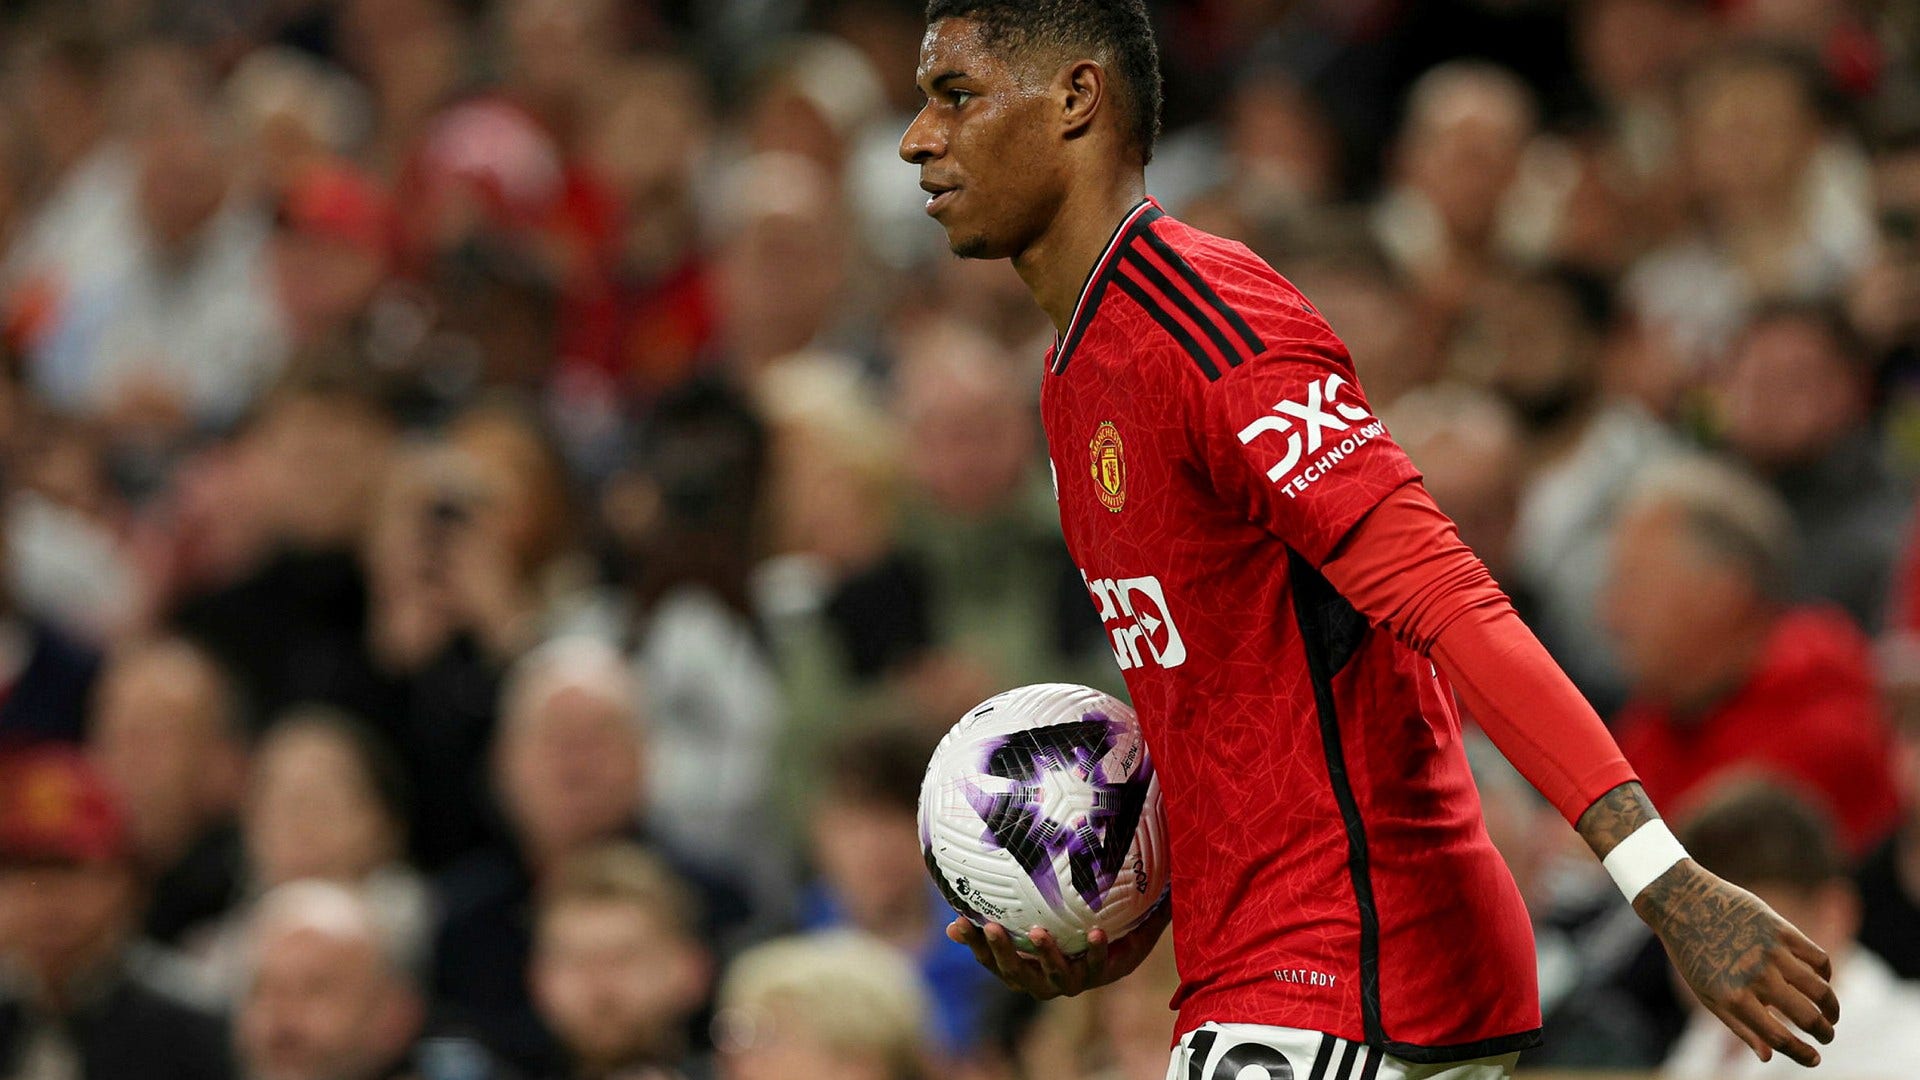 England squad ready – Rashford is expelled from the European Championship